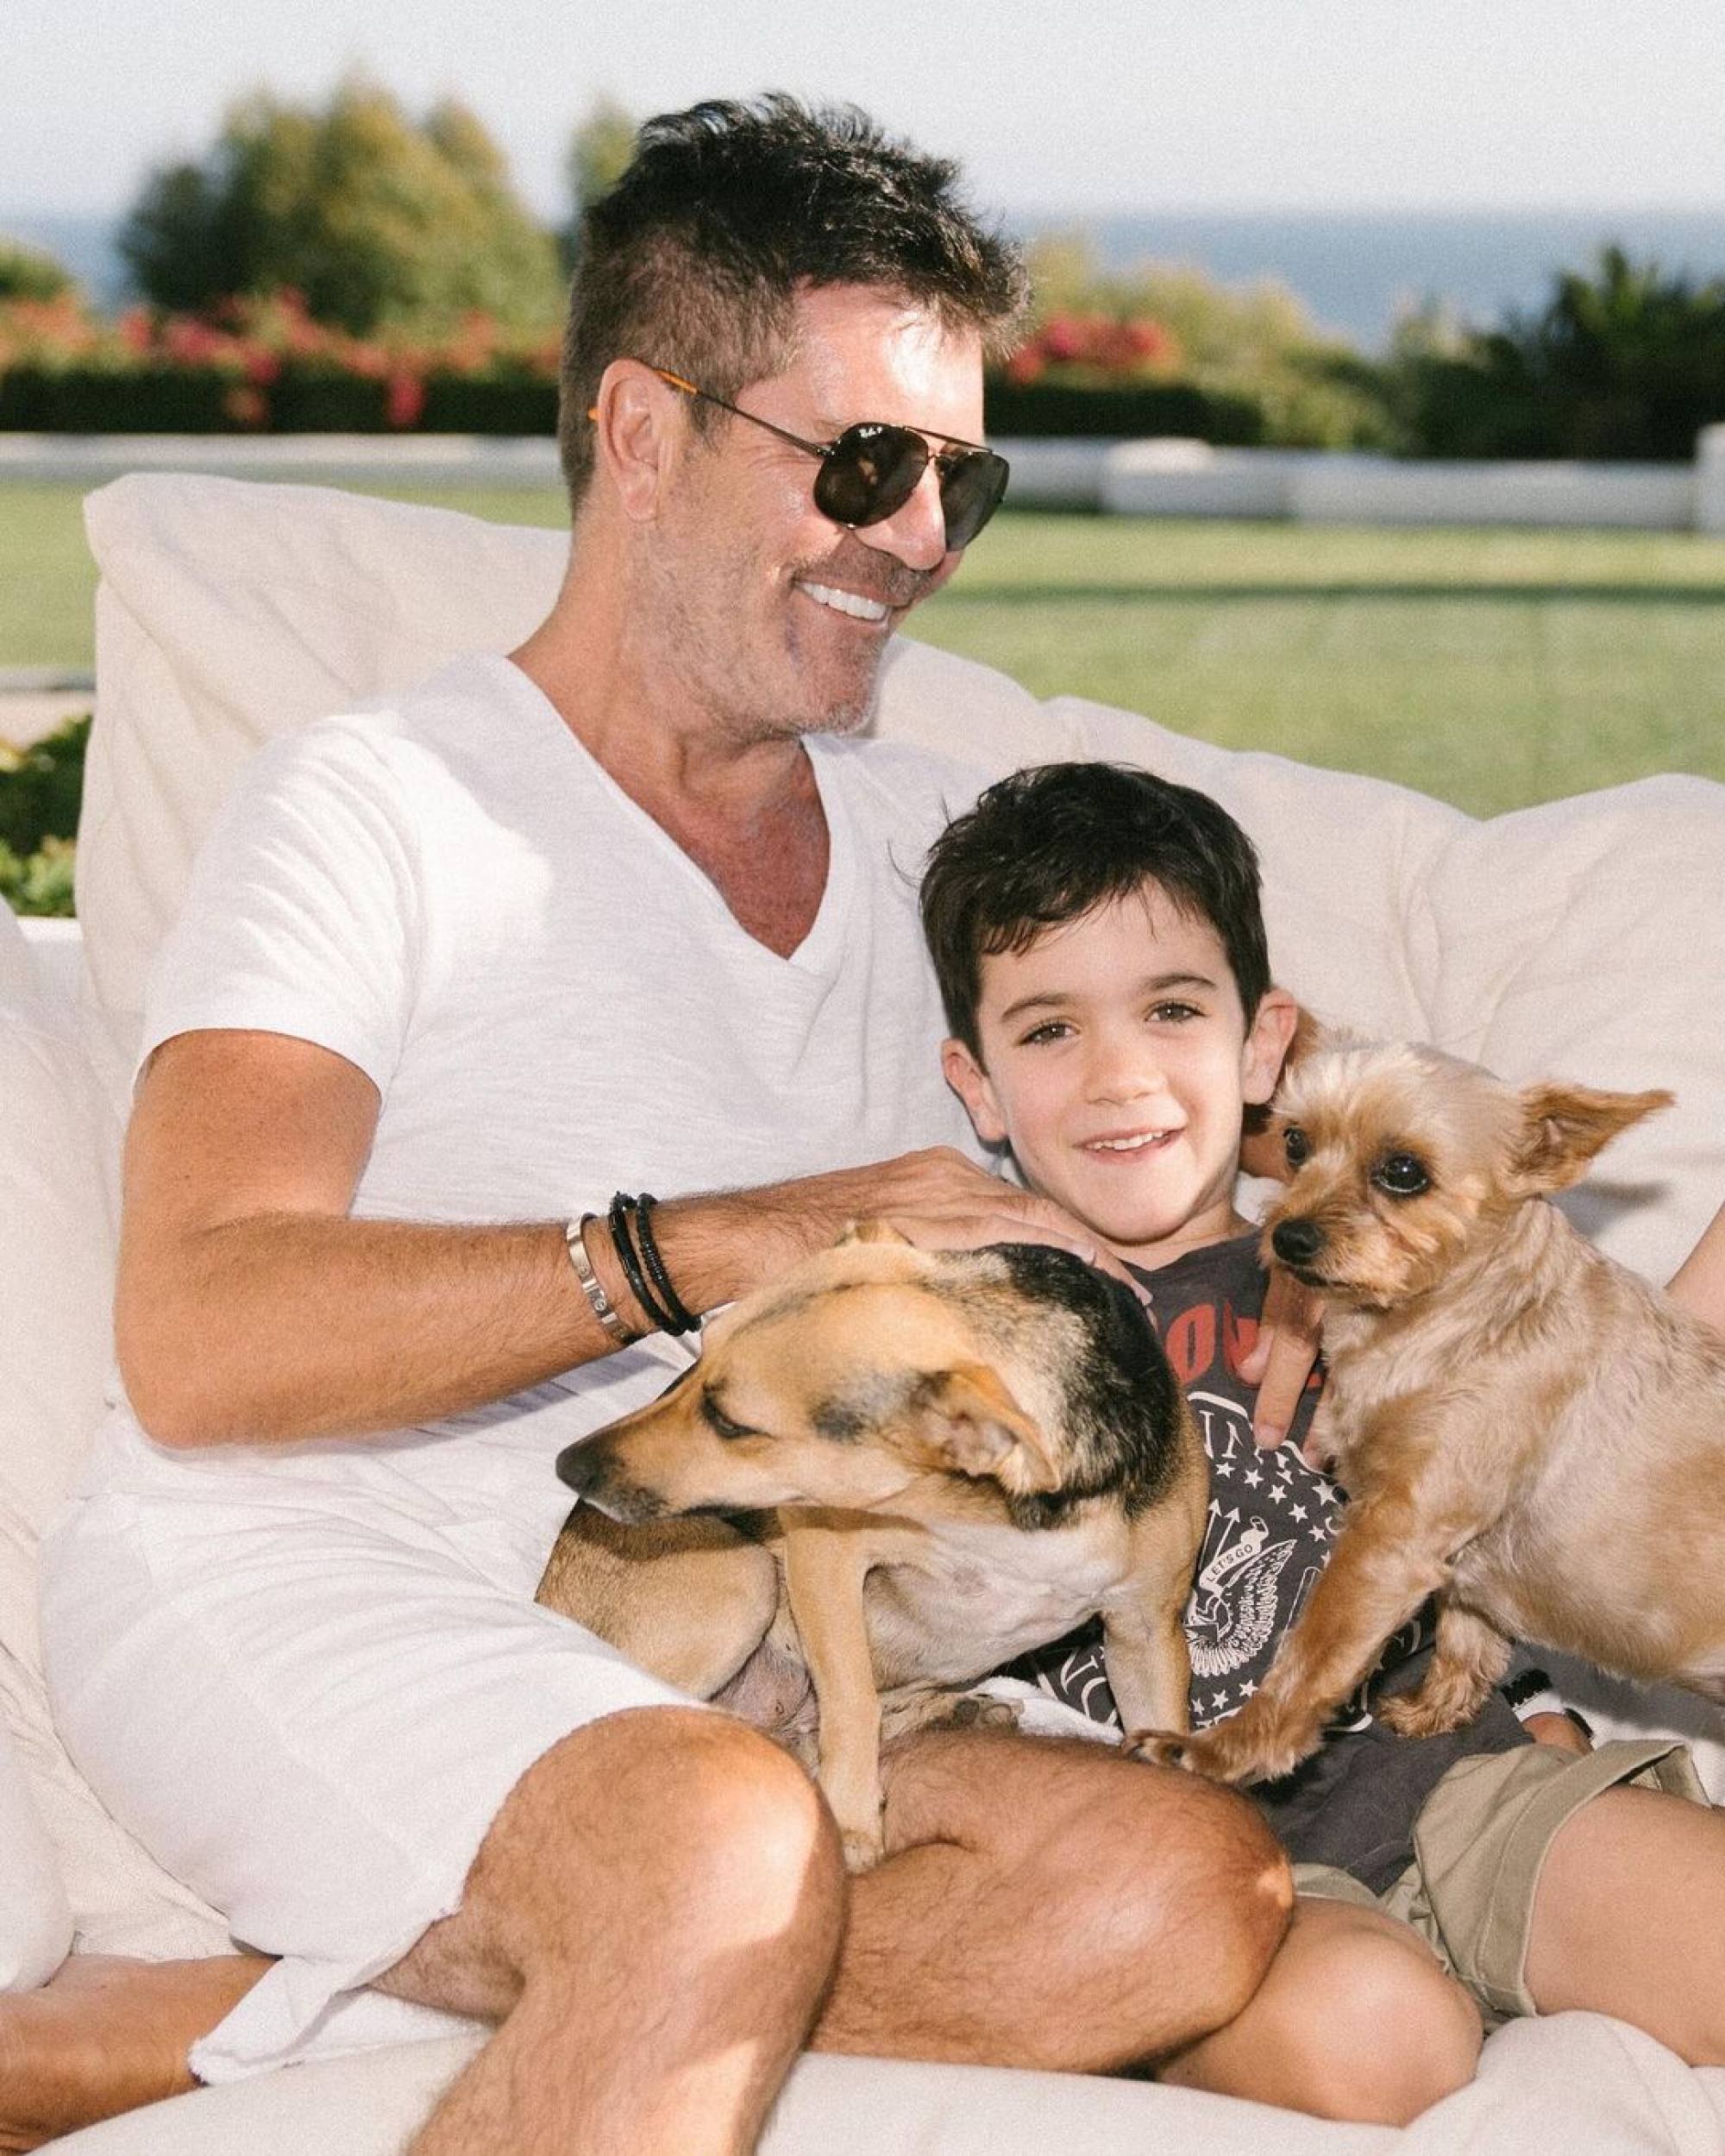 Why Simon Cowell rushed to sell his luxurious London mansion: the